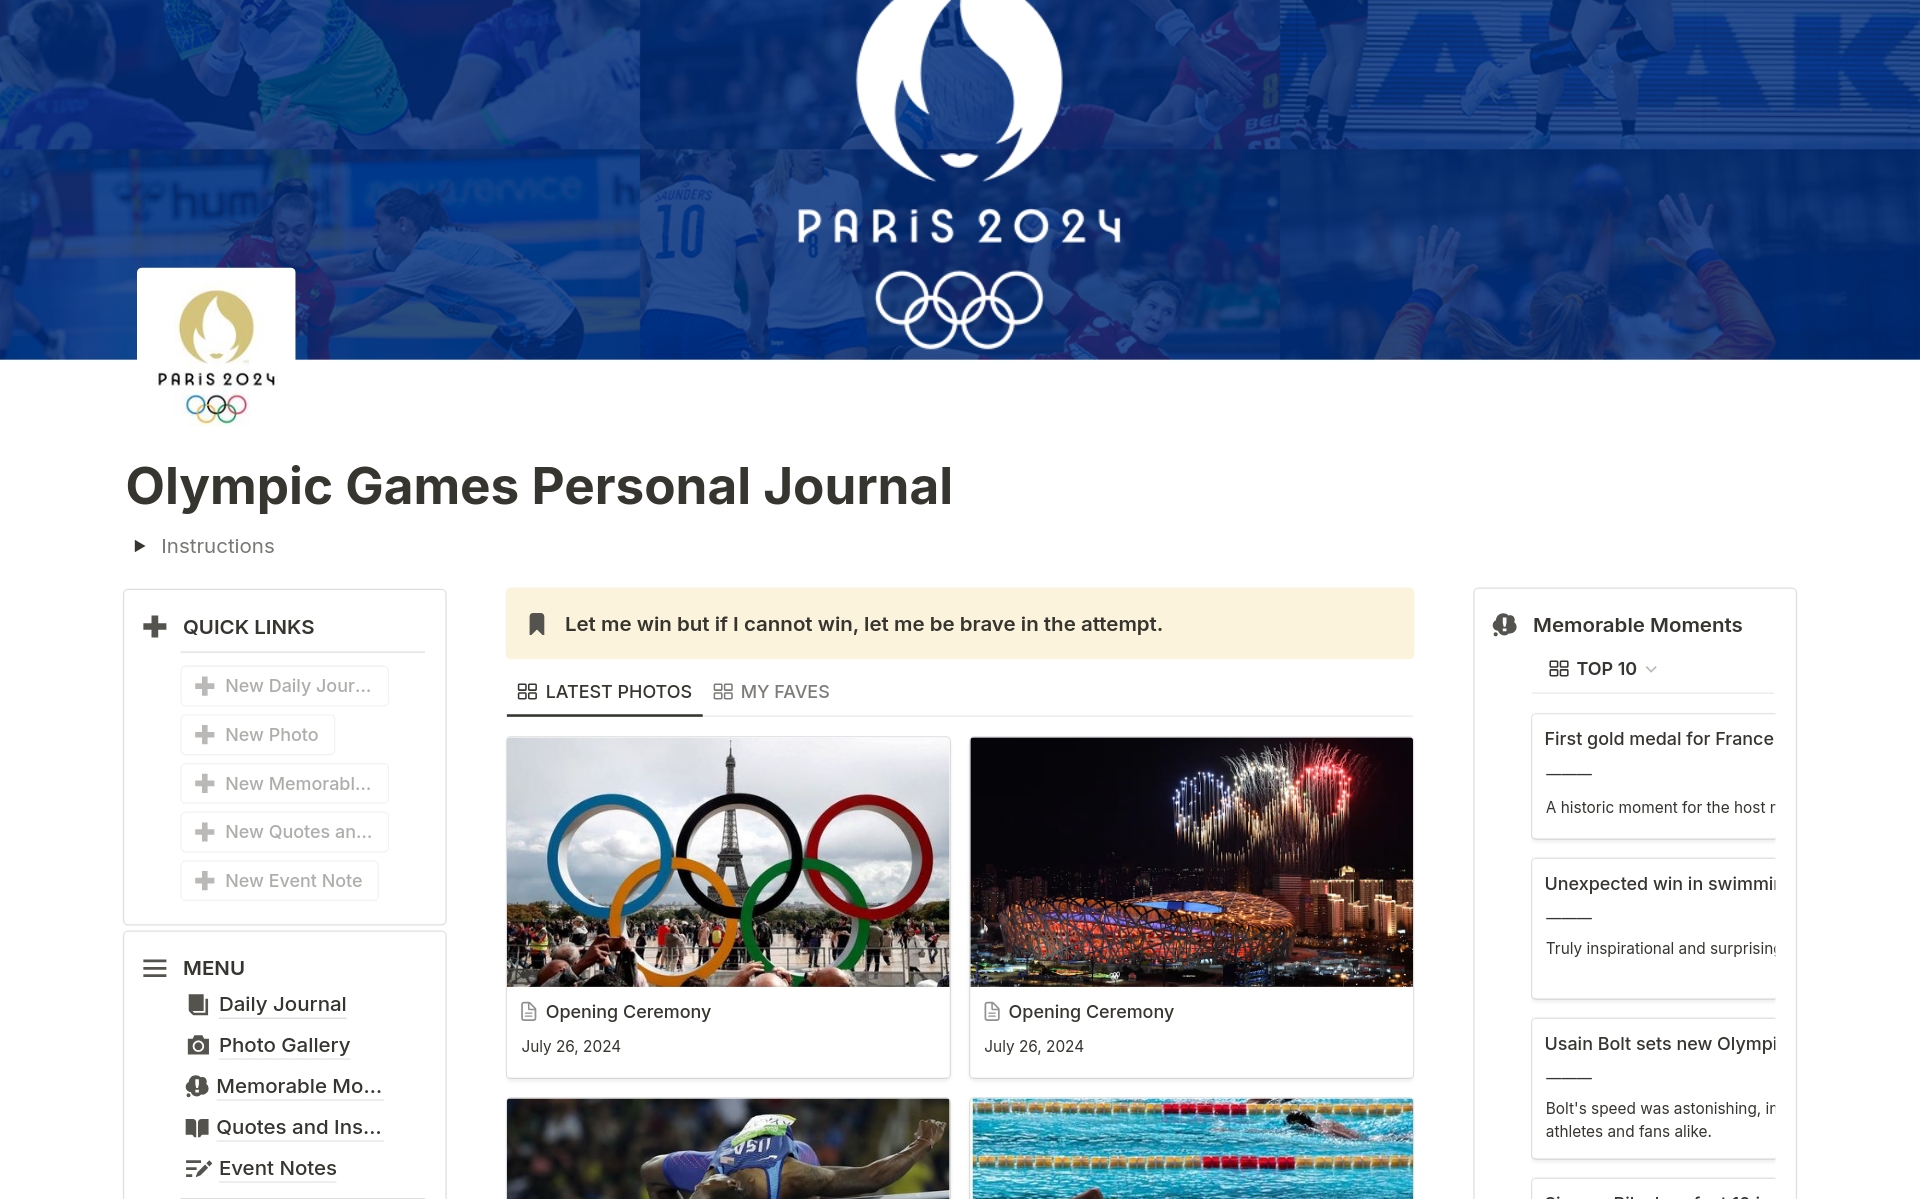 A personal journal template for documenting your own experiences and reflections during the Paris 2024 Olympics.